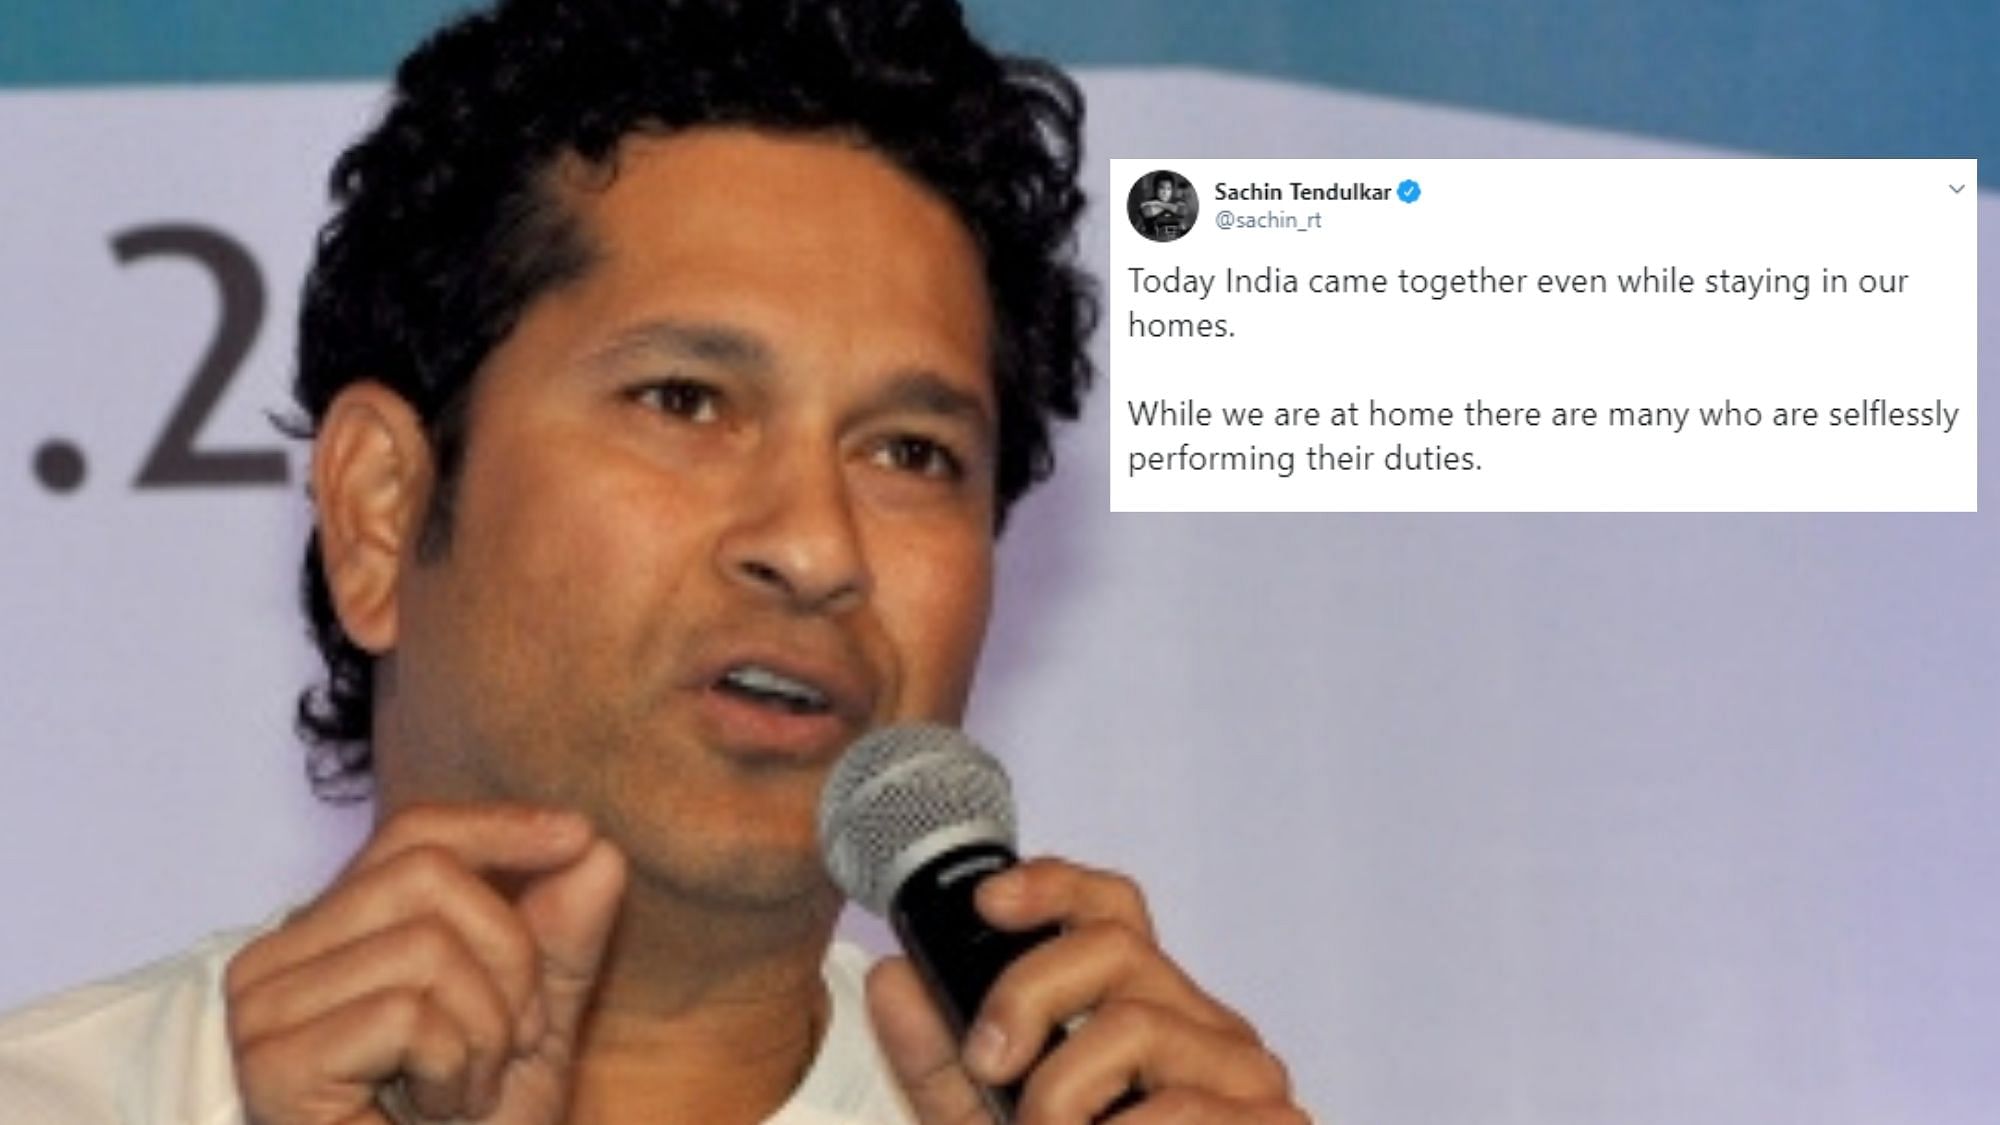 Sachin Tendulkar shared a videop, praising all Indians for coming together as a nation, followed by clapping hands.